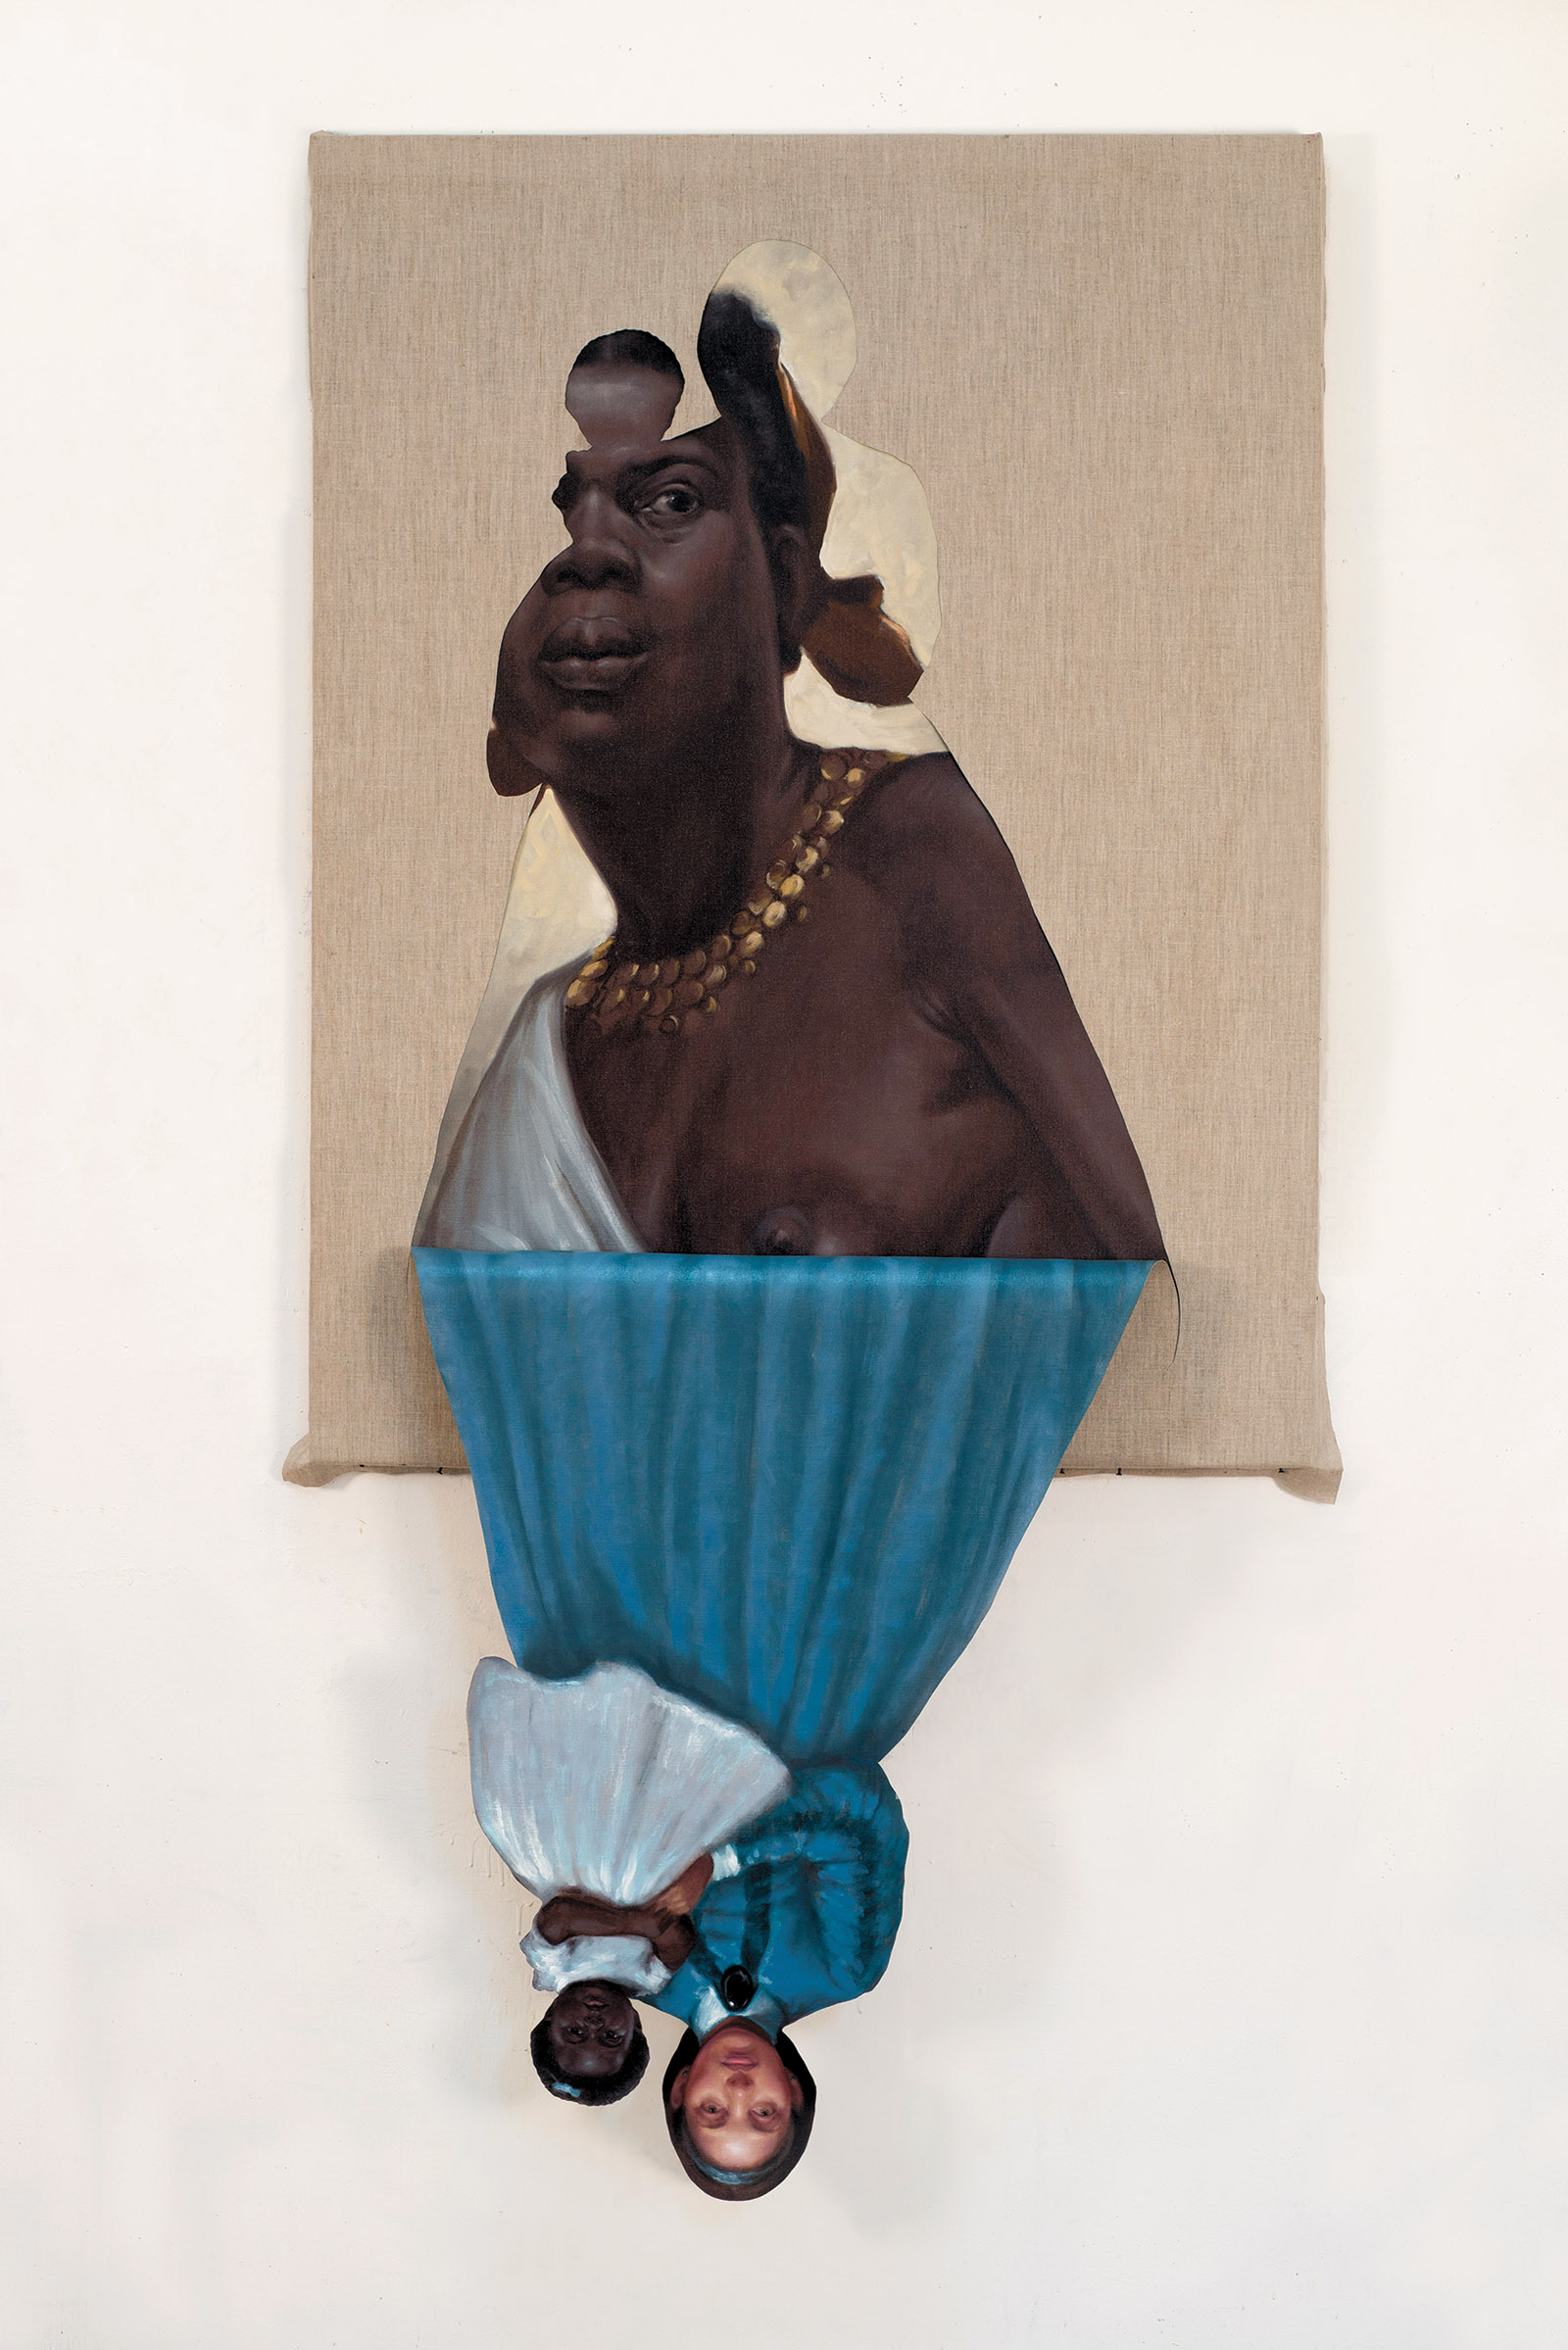 Titus Kaphar: Her Mother’s Mother’s Mother, 2014; from the exhibition ‘UnSeen: Our Past in a New Light,’ which includes work by Kaphar and Ken Gonzales-Day.It is on view at the Smithsonian’s National Portrait Gallery, Washington, D.C., through January 6, 2019.